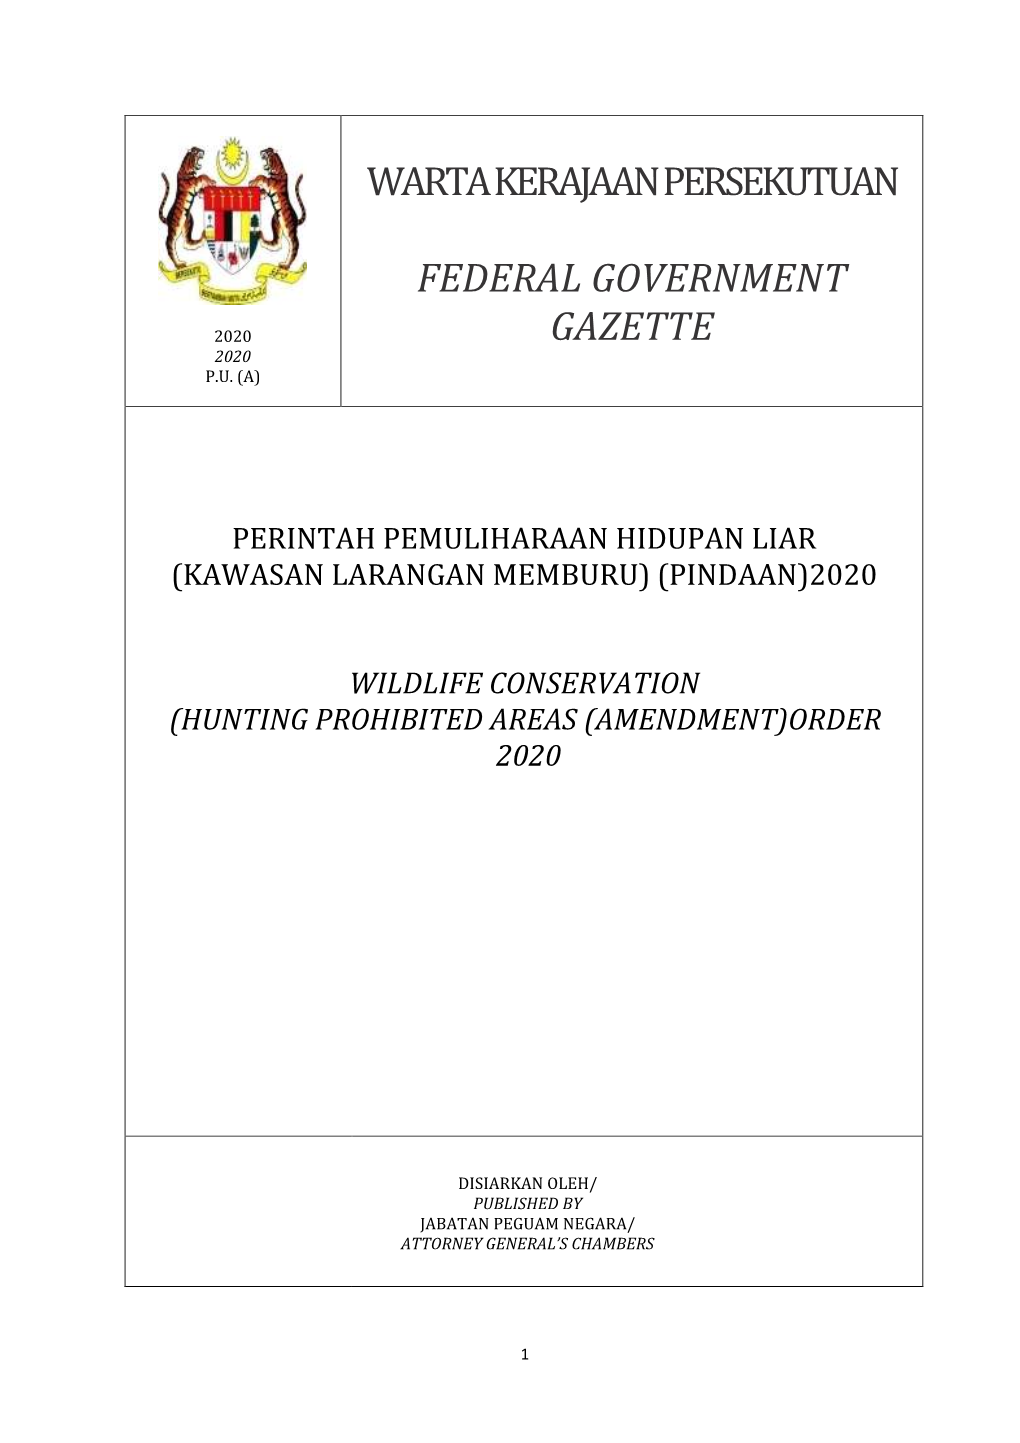 Wildlife Conservation (Hunting Prohibited Areas (Amendment)Order 2020